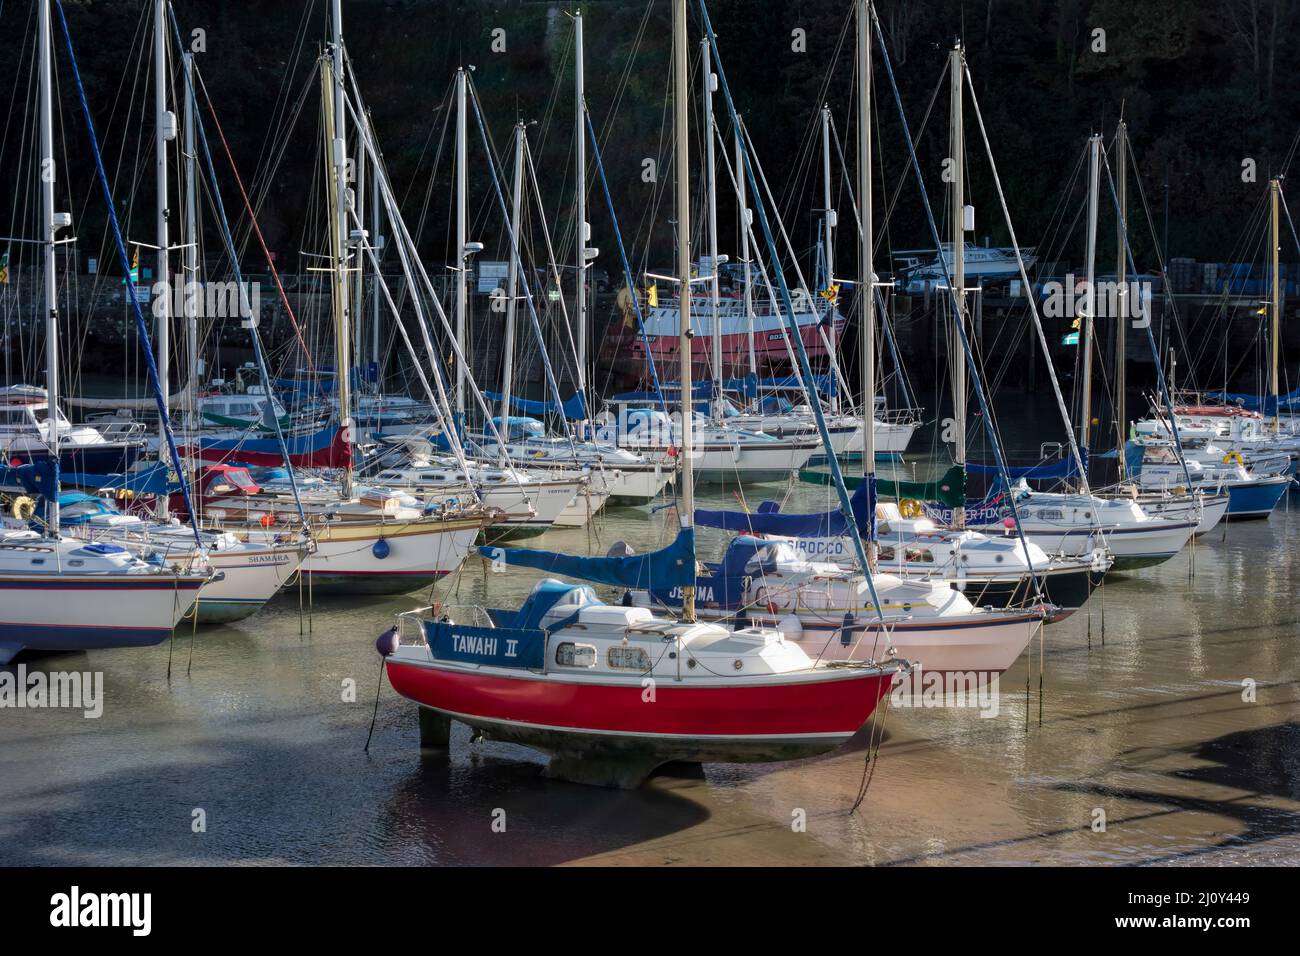 ILFRACOMBE, DEVON, UK - OCTOBER 19 : View of Ilfracombe harbour on October 19, 2013] Stock Photo